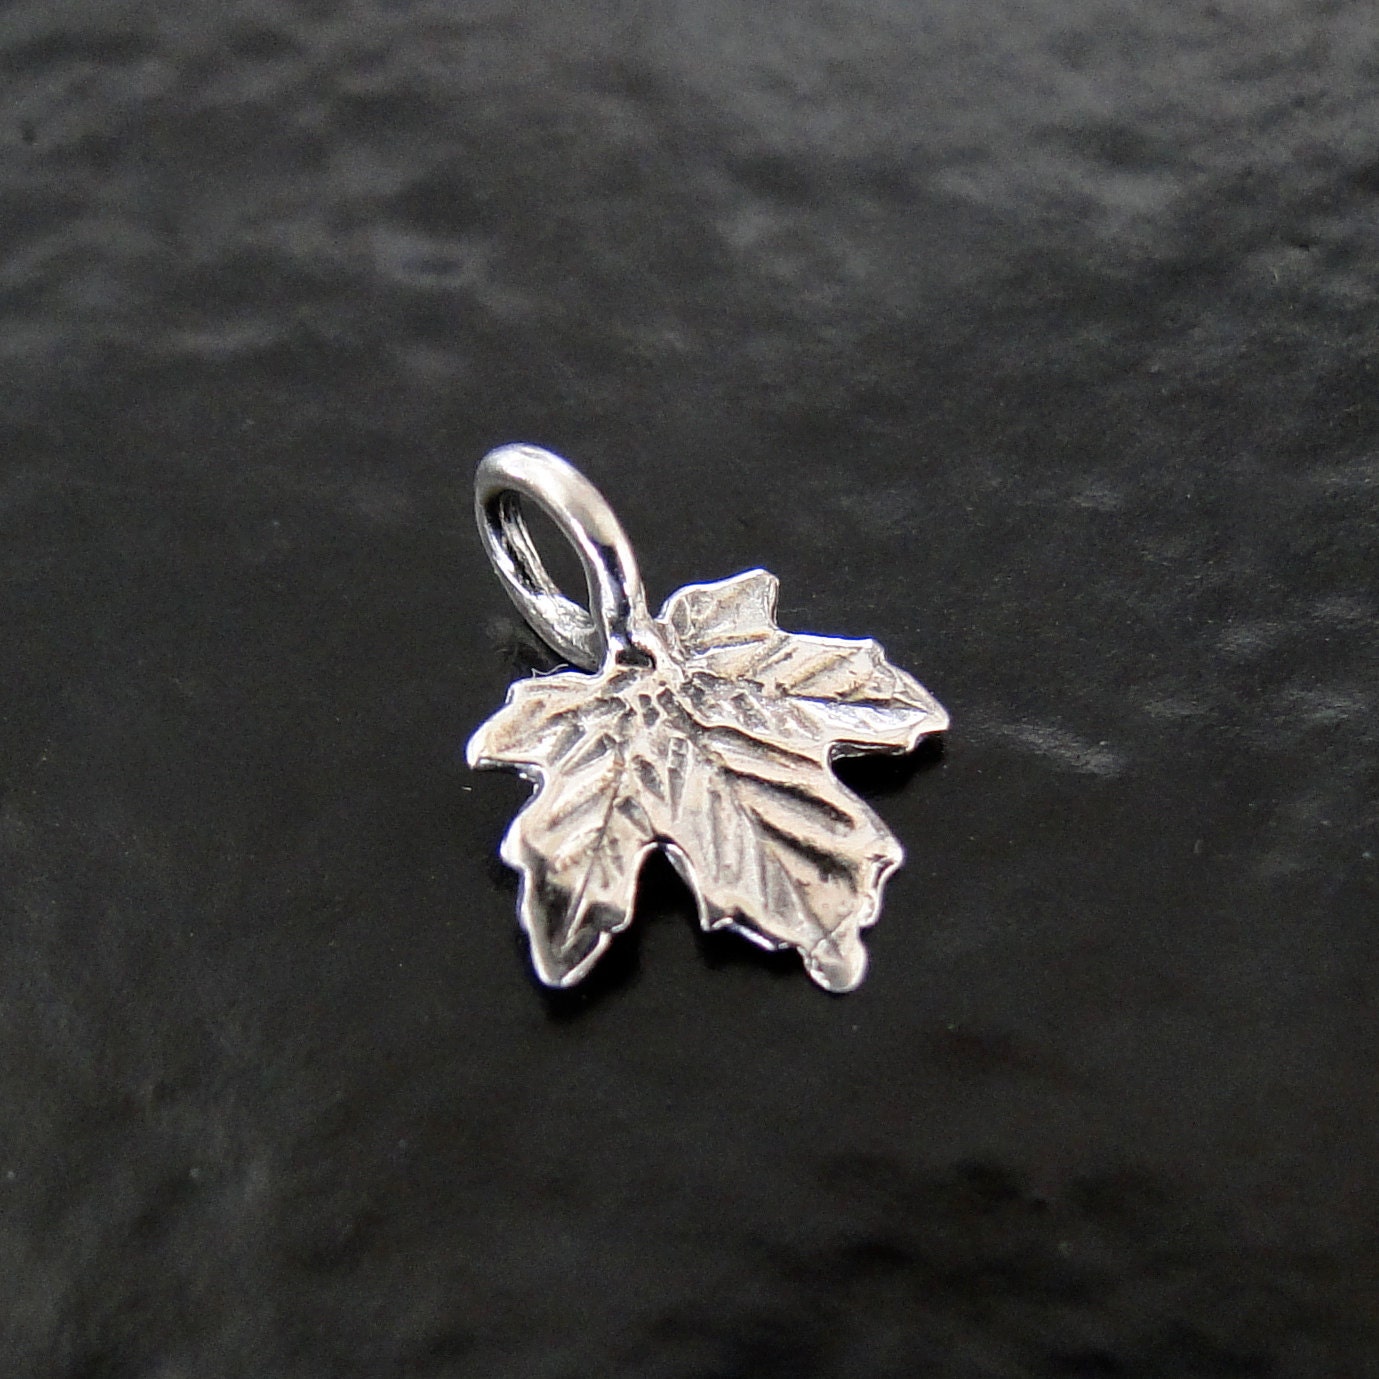 Craftdady Leaf Bead Charms Transparent Maple Leaves Pendants Hanging Ornament Cute Charms Earring Charms for Necklaces Bracelet Jewelry Craft Making